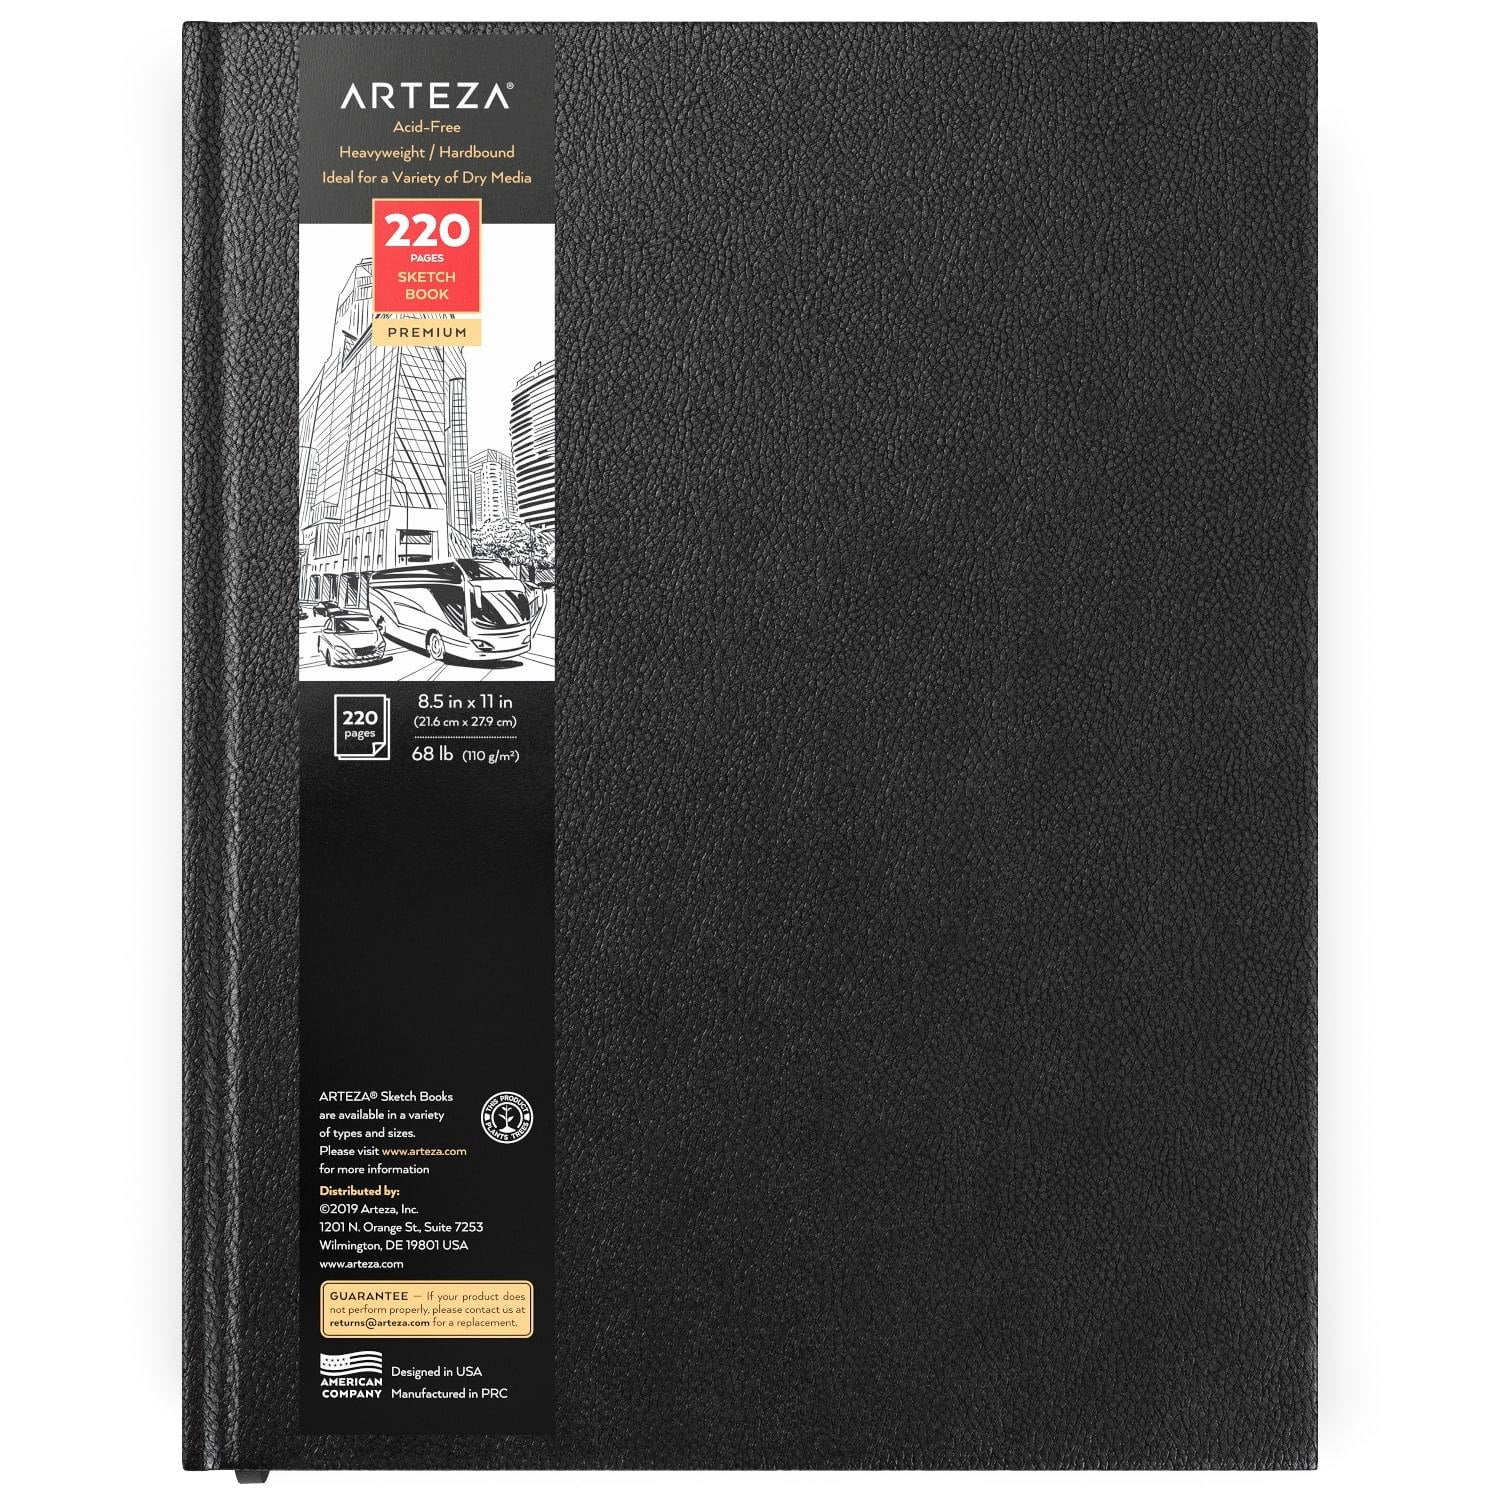 Hardcover Journals with Bookmark Ribbon Arteza 3.5x5.5 Mini Sketch Book Pocket Notebooks 118lb/175gsm for a Variety of Dry Media 88 Pages per Pad Inner Pocket and Elastic Strap